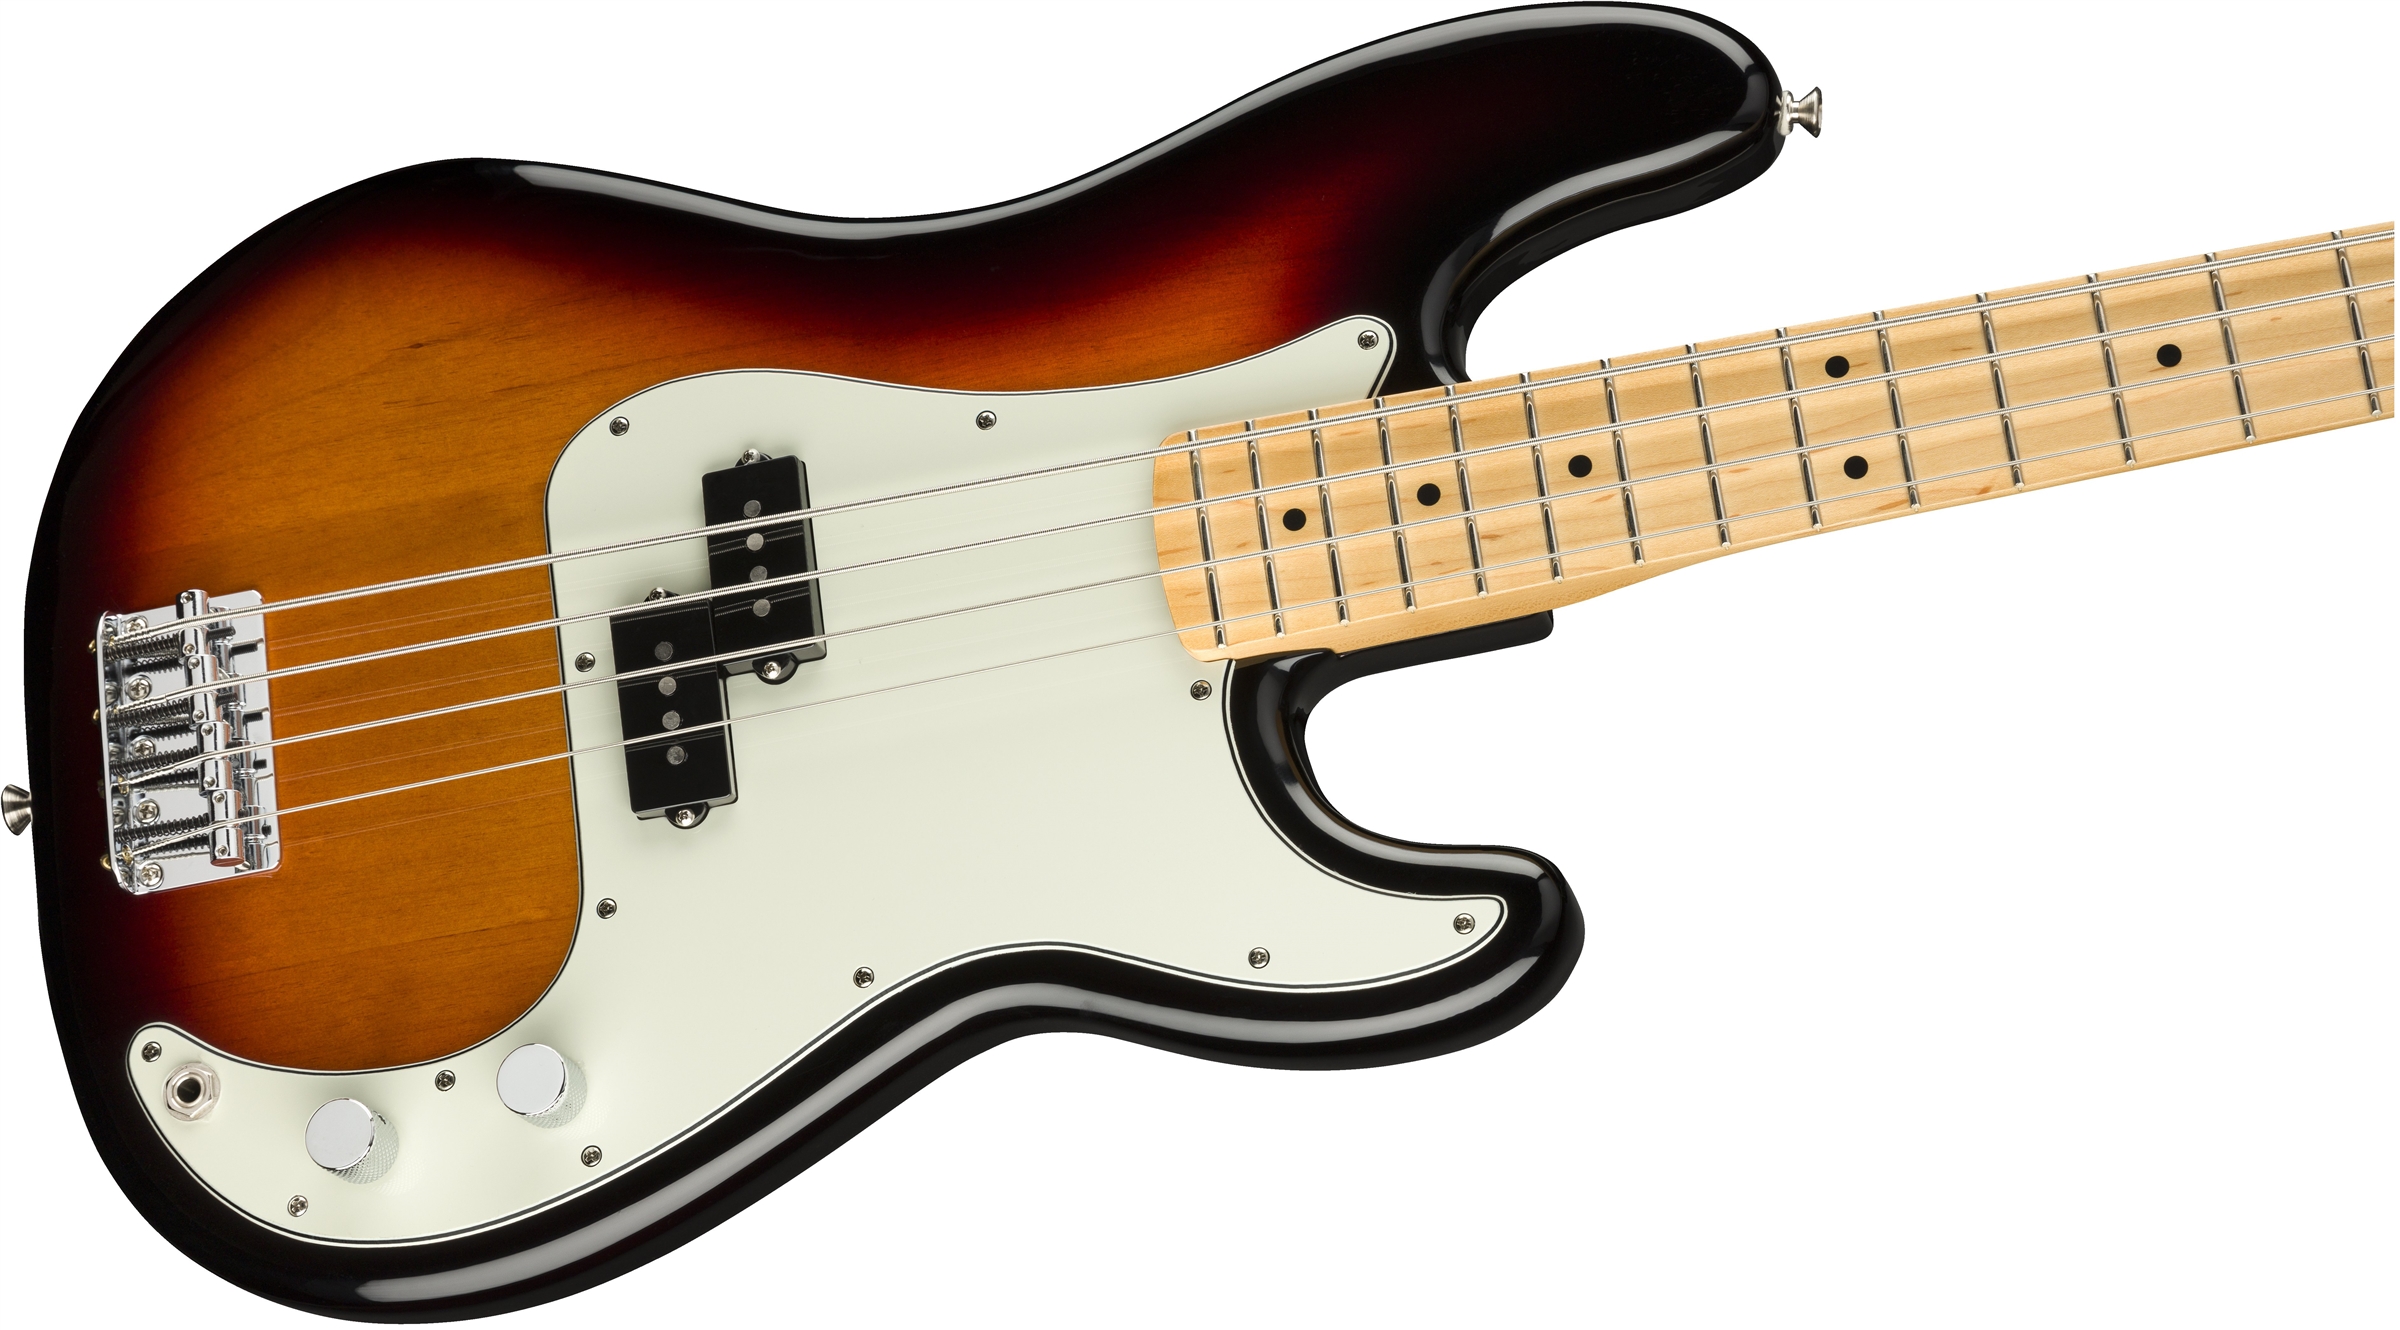 Fender Precision Bass Player Mex Mn - 3-color Sunburst - Solid body electric bass - Variation 3